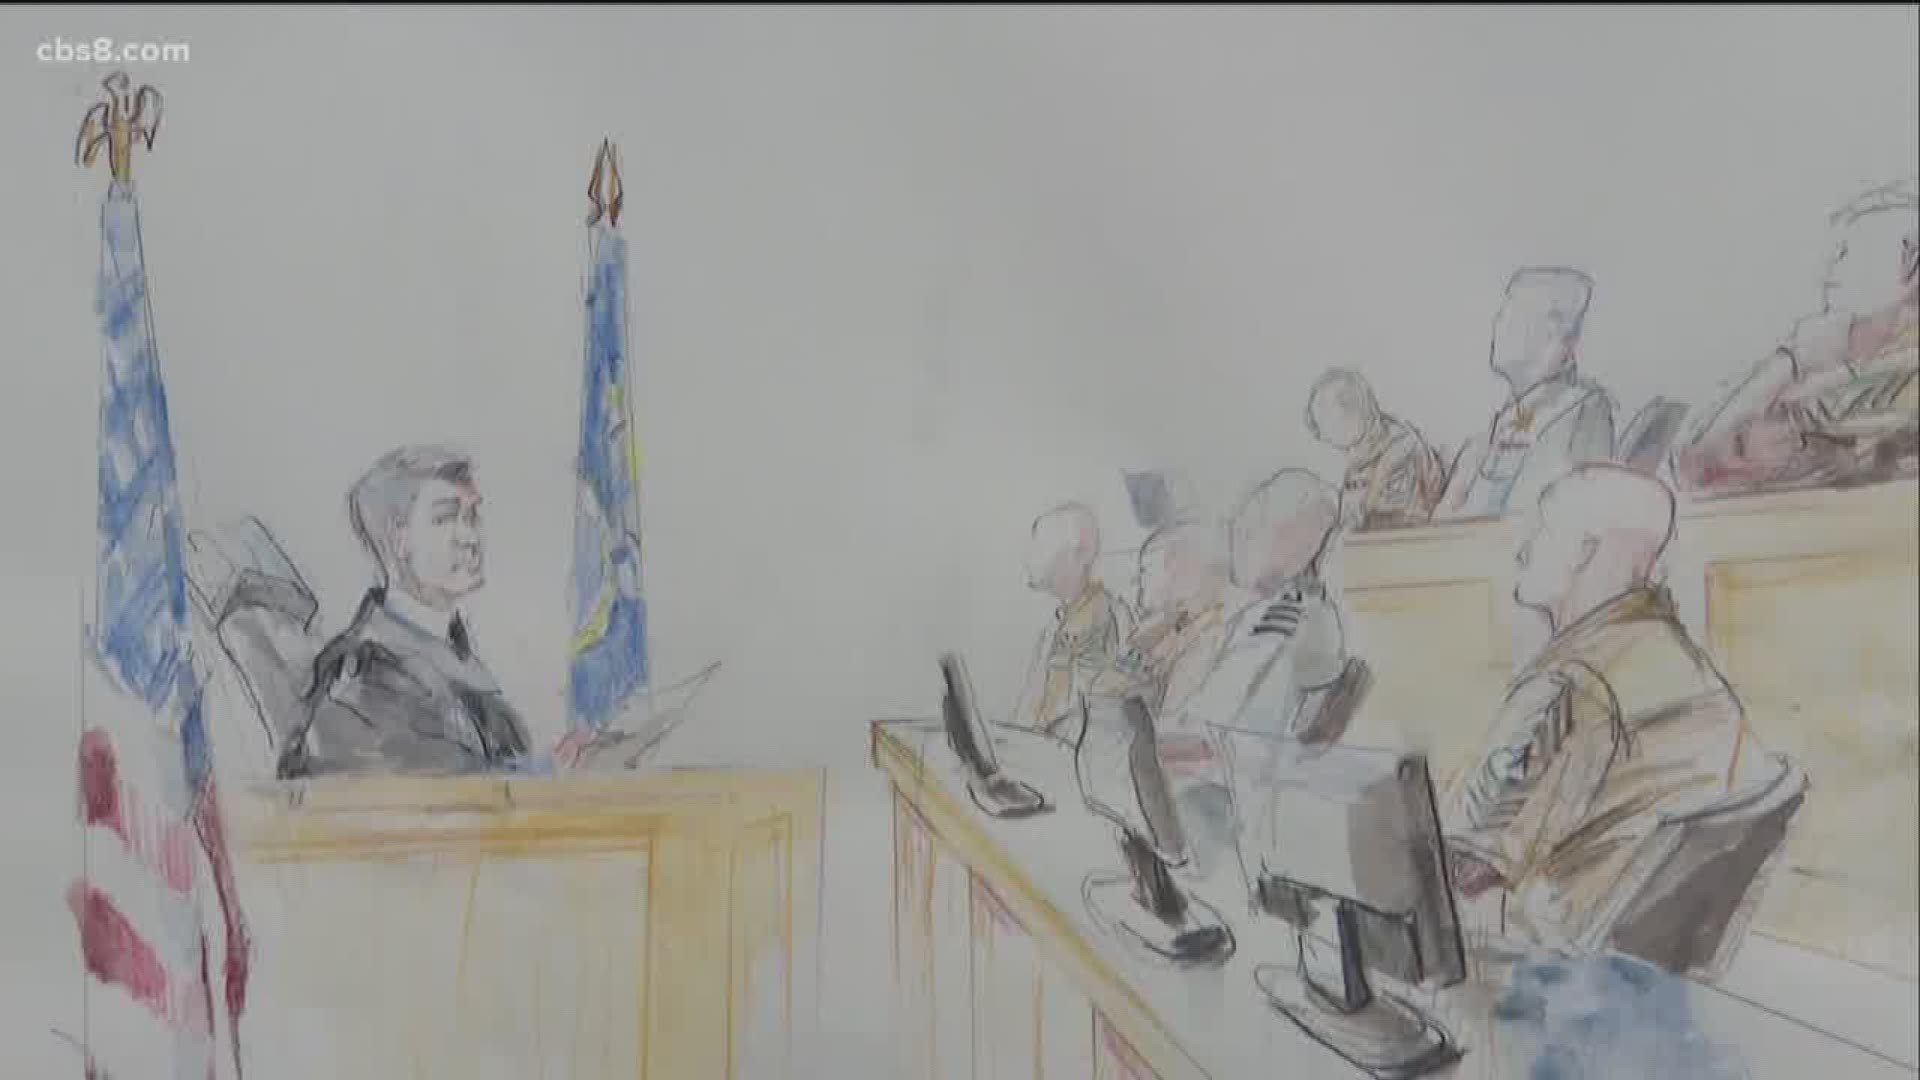 The case of a Navy SEAL accused of war crimes is now in the hands of a jury. News 8's Richard Allyn spoke to a former Judge Advocate General - or JAG - about the unique workings of a military trial.